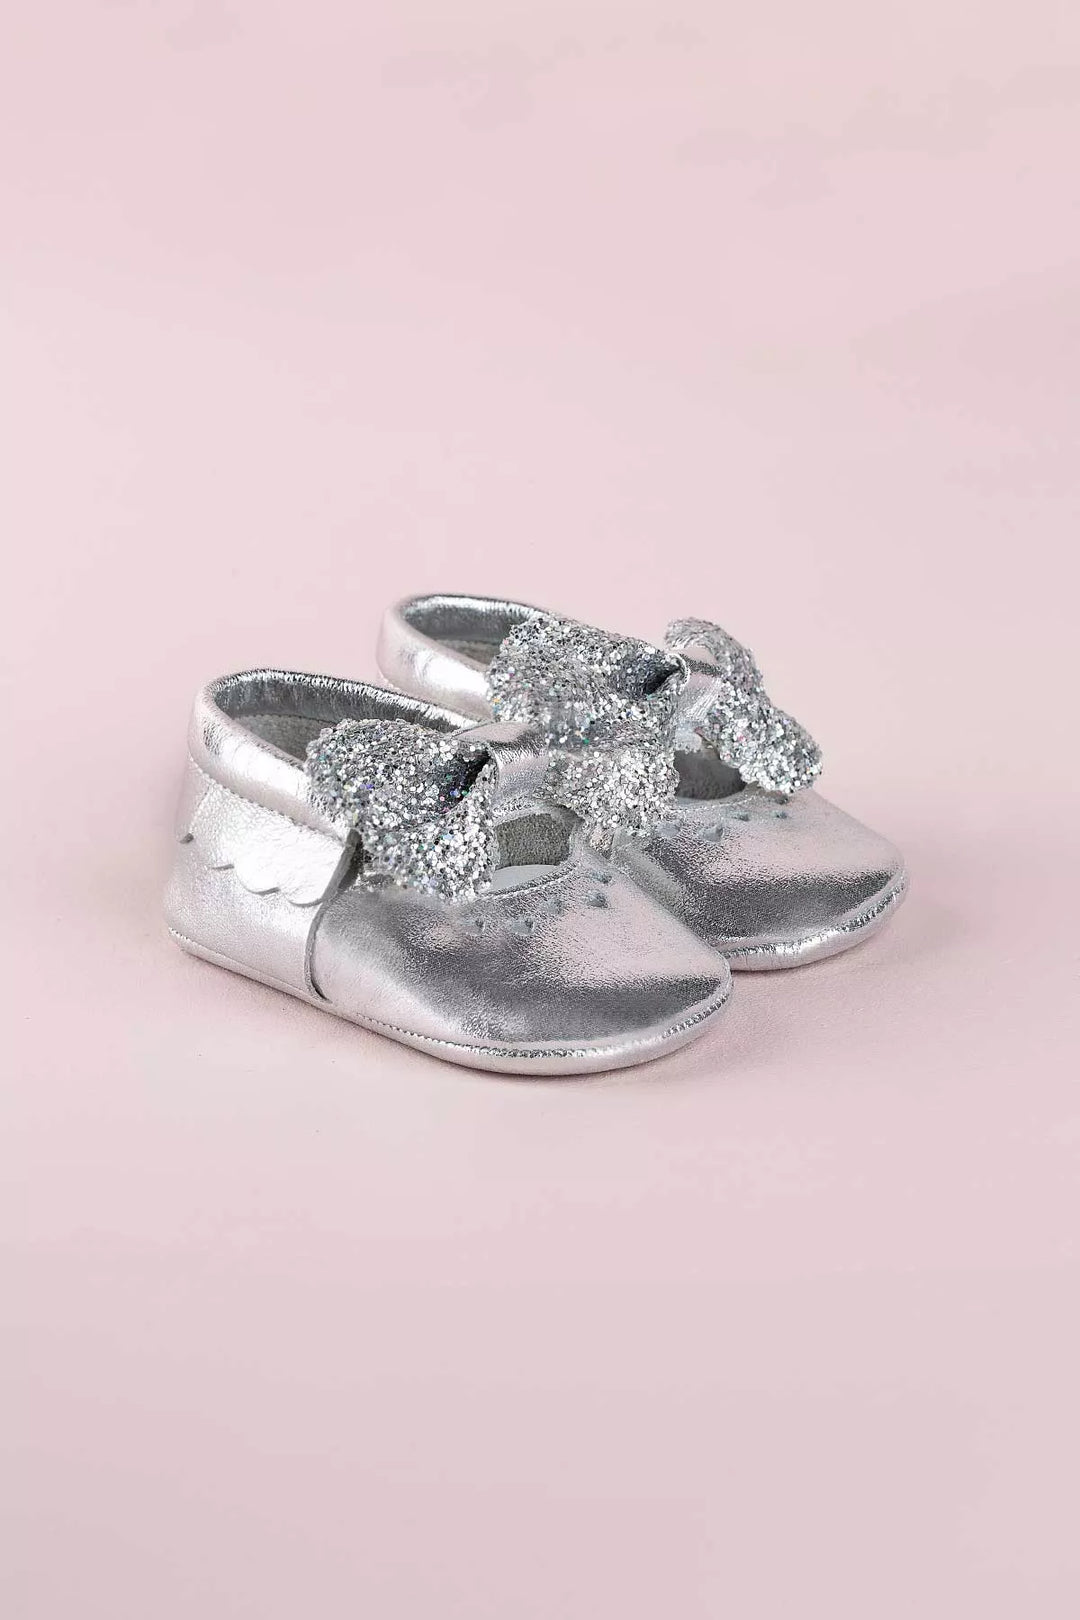 Silver baby shoes that have glitter bow tie and heart details